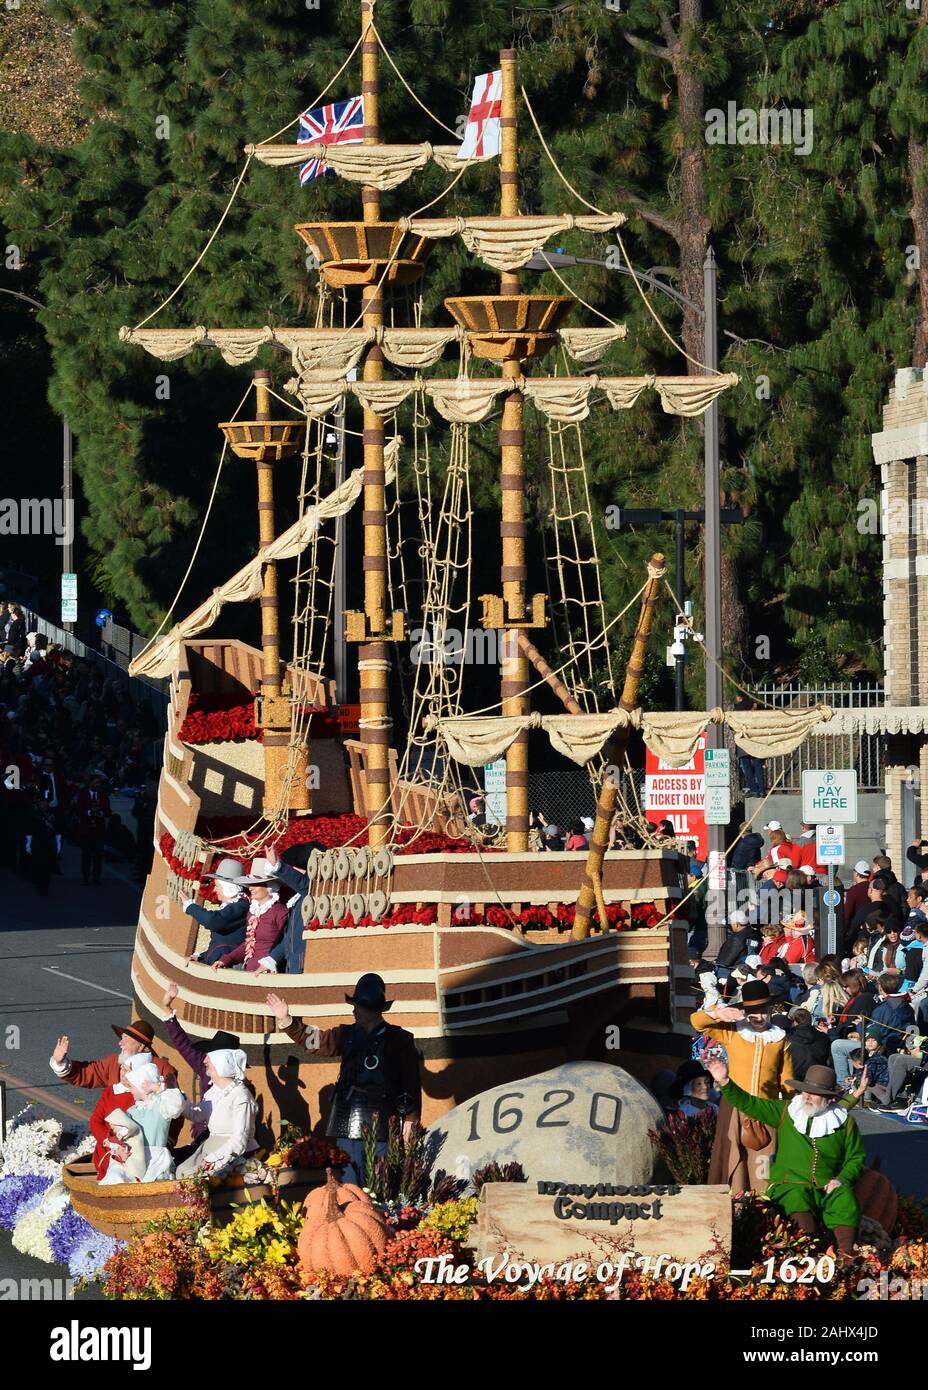 Pasadena, United States. 01st Jan, 2020. General Society of Mayflower Descendants 'The Voyage of Hope' float, winner of the Americana award makes its way down Colorado Boulevard during the 131st annual Tournament of Roses Parade held in Pasadena, California on Wednesday, January 1, 2020. Photo by Jim Ruymen/UPI Credit: UPI/Alamy Live News Stock Photo